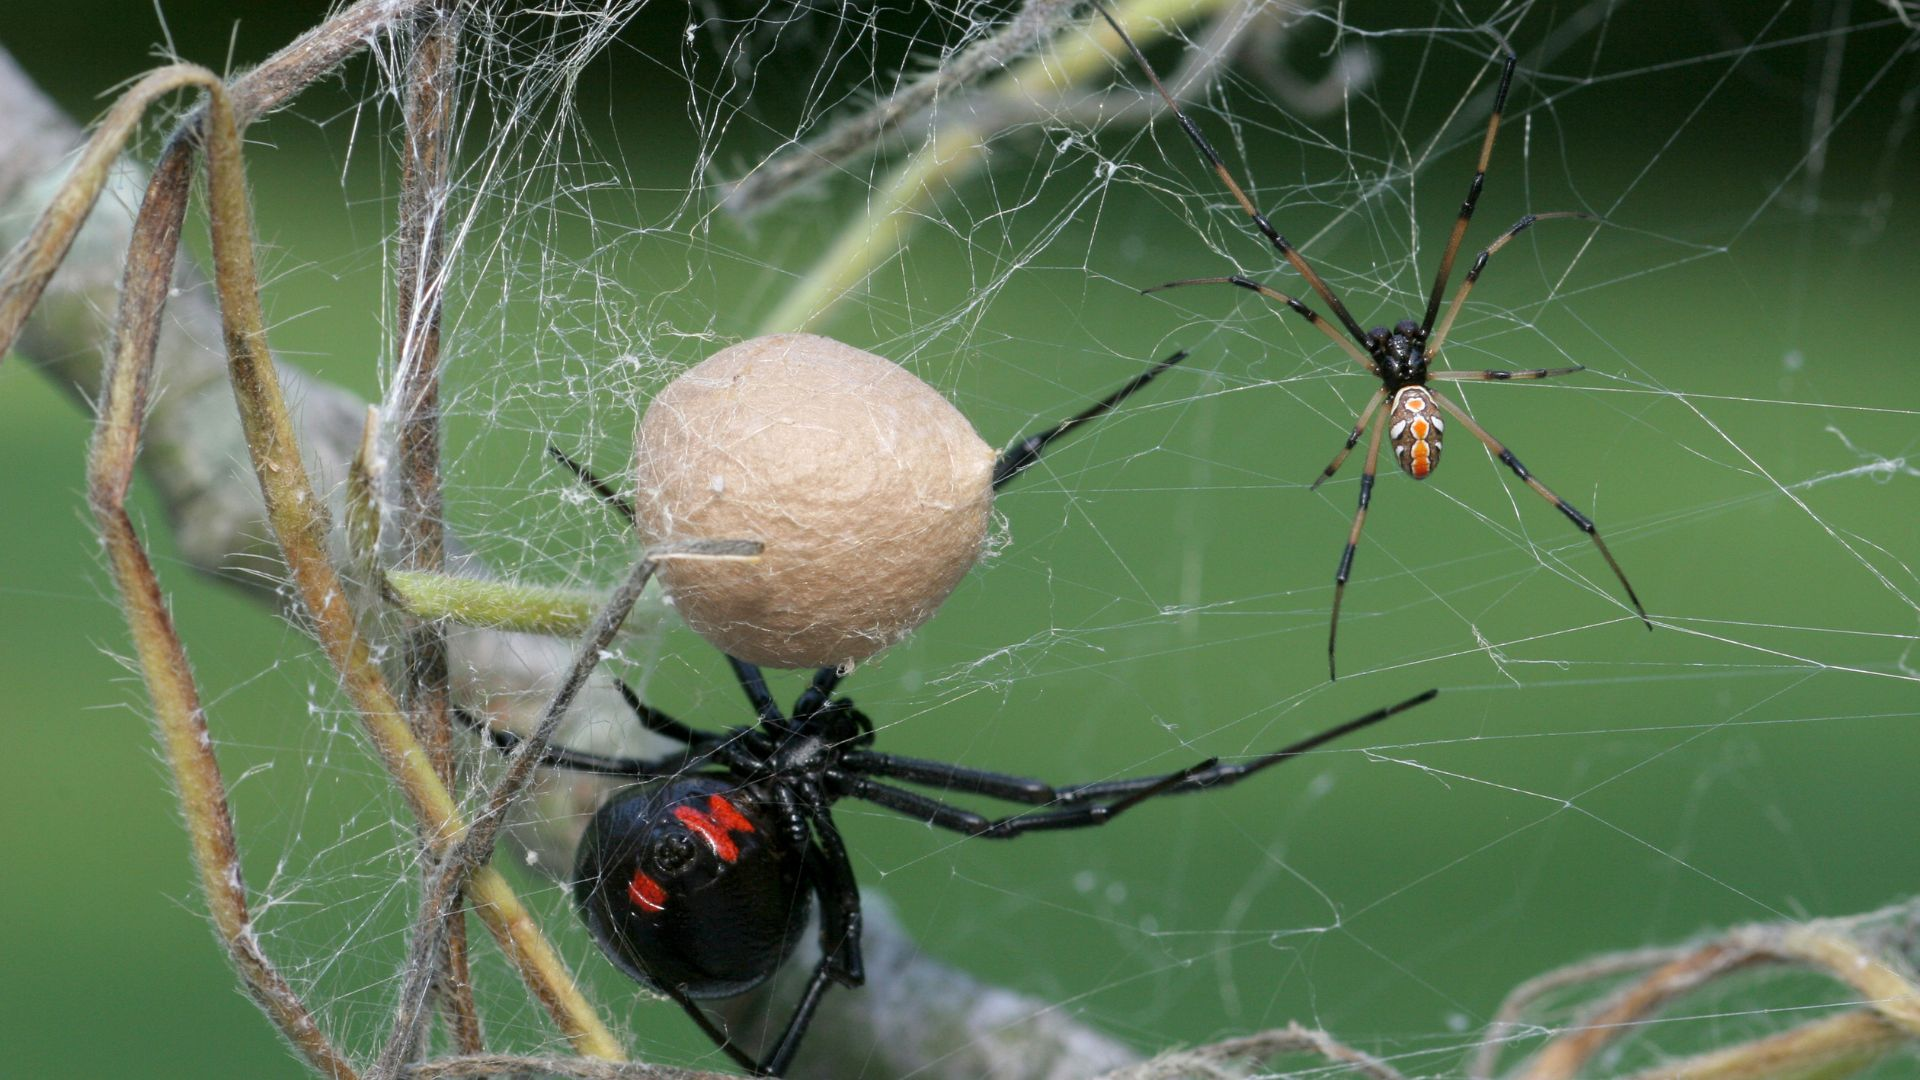 An image of a male and female black widow near an egg sac in a web.